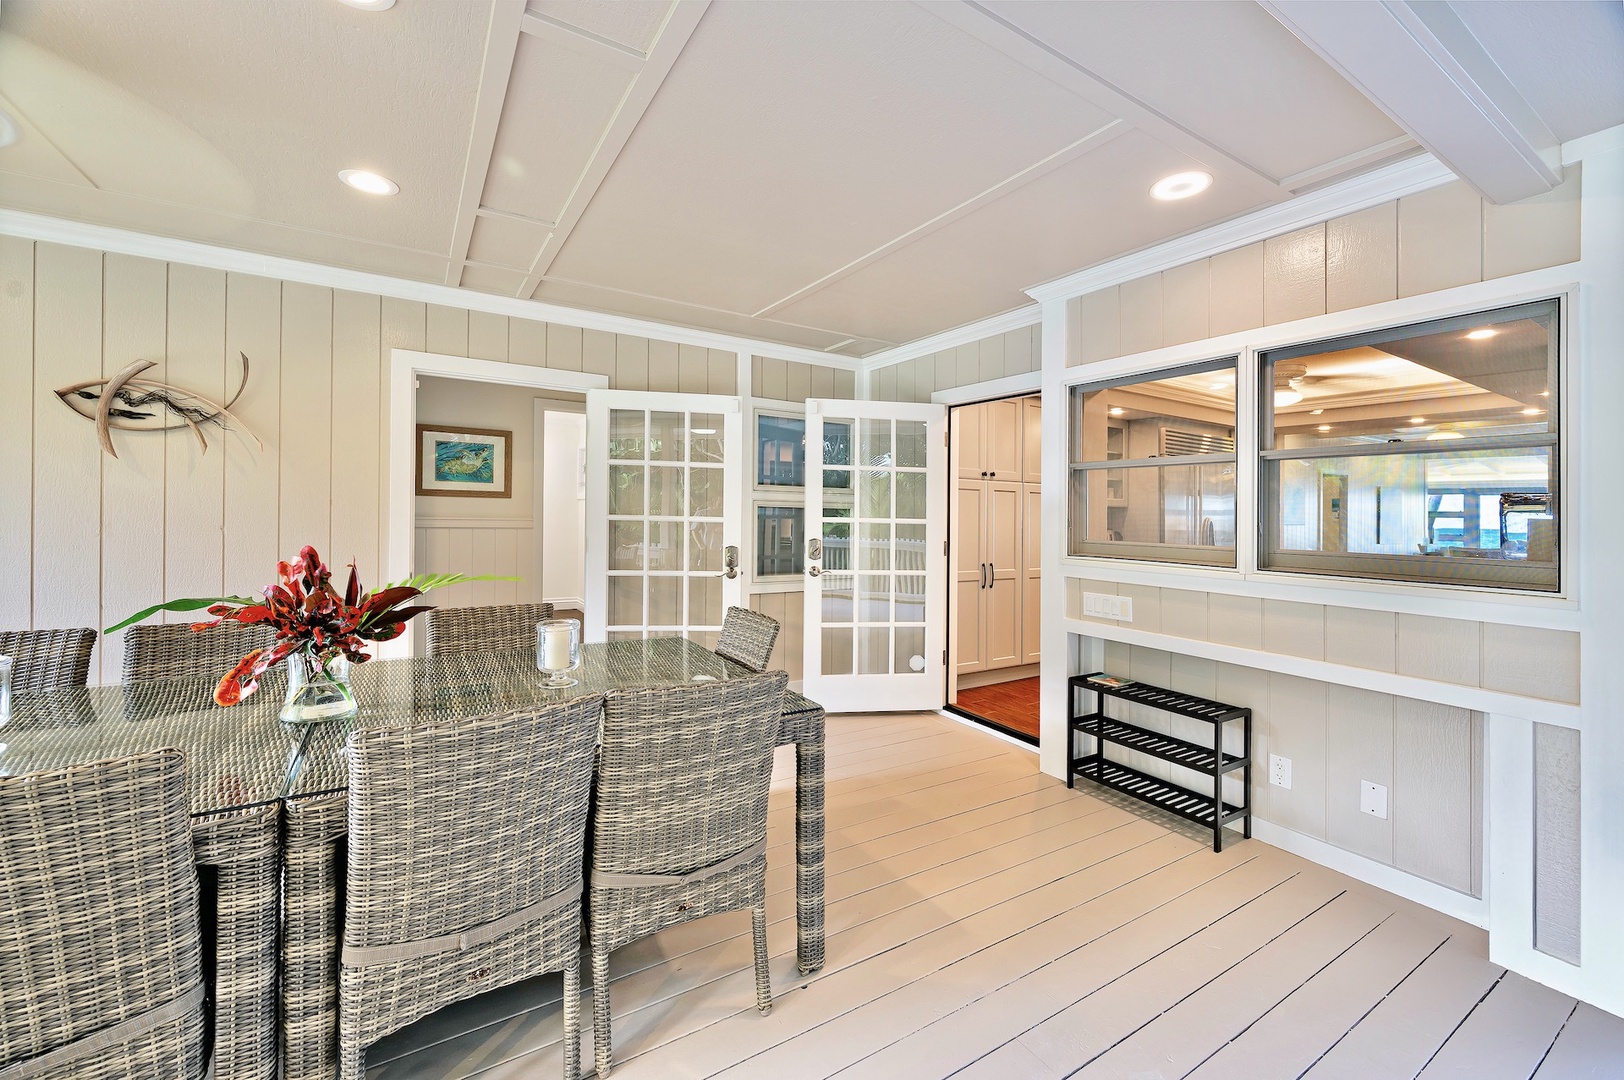 Kailua Vacation Rentals, Lanikai Seashore - One of two indoor dining options just off the kitchen